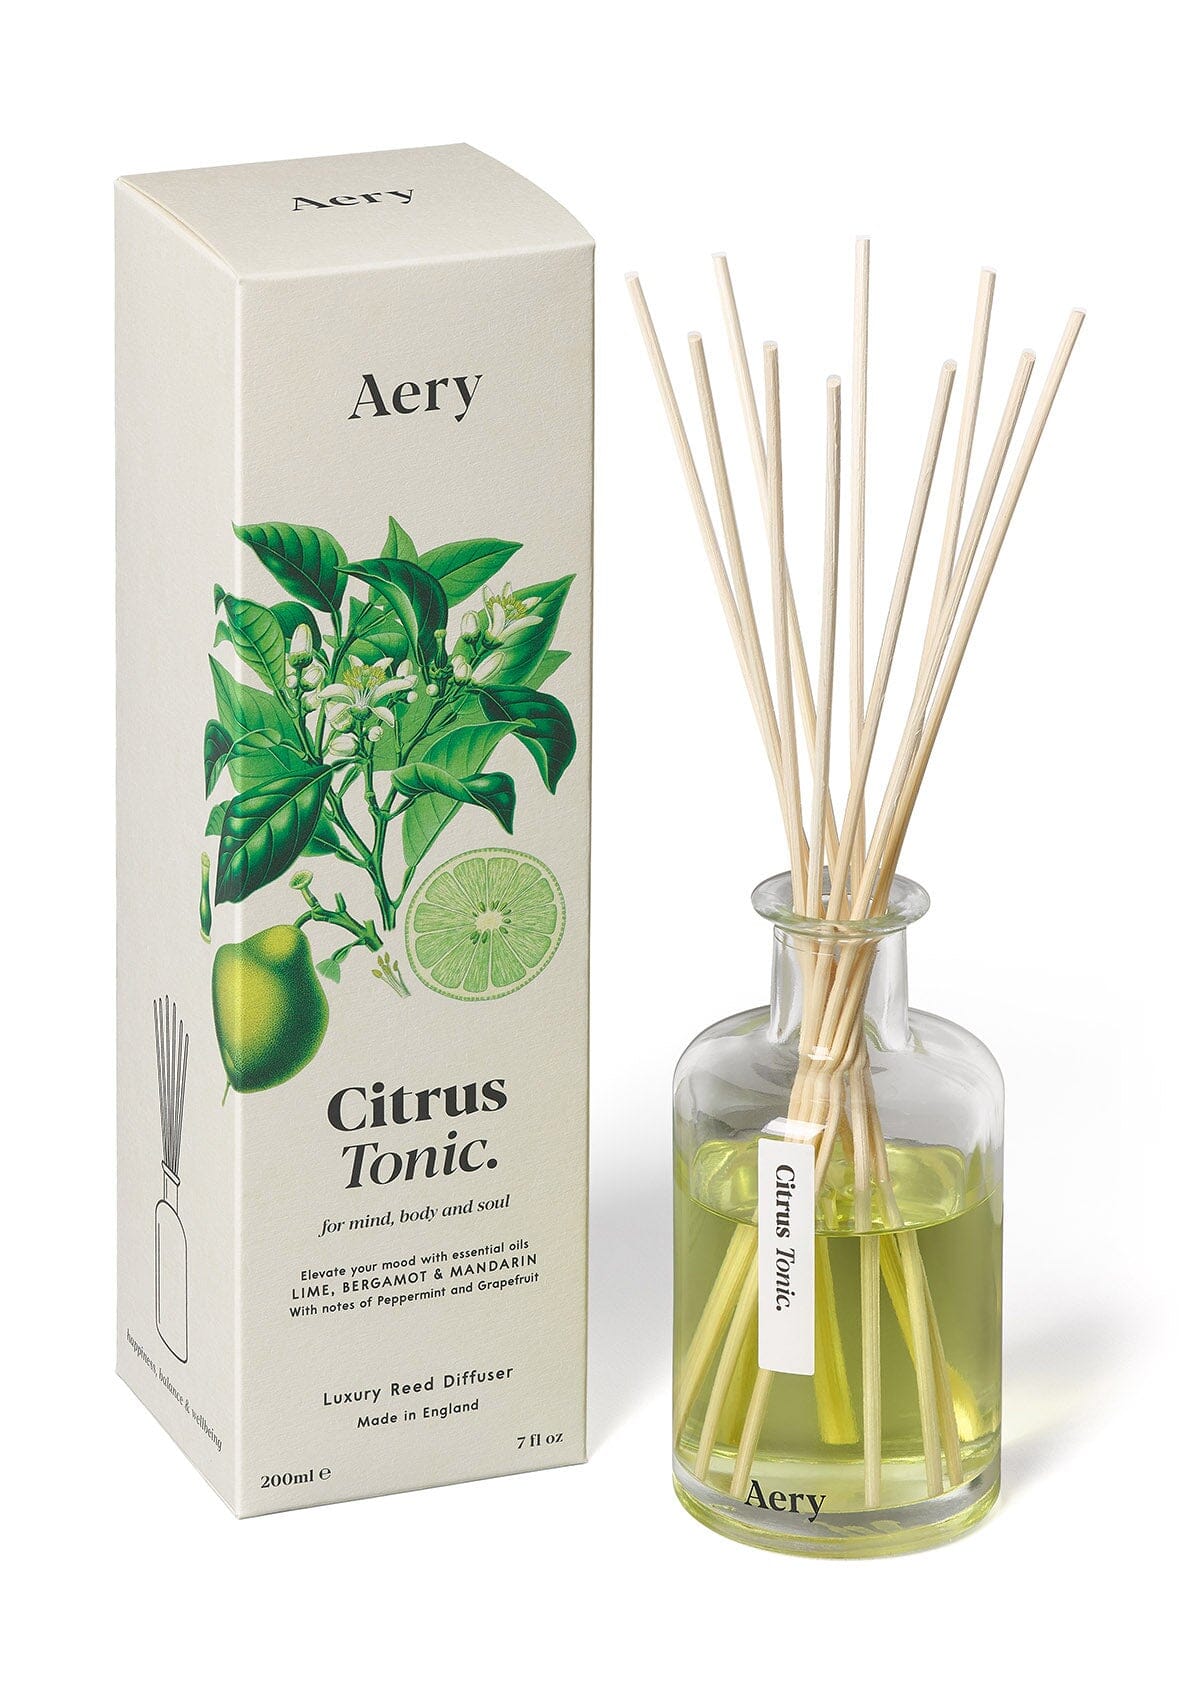 Cream Citrus Tonic diffuser displayed next to product packaging by Aery on white background 